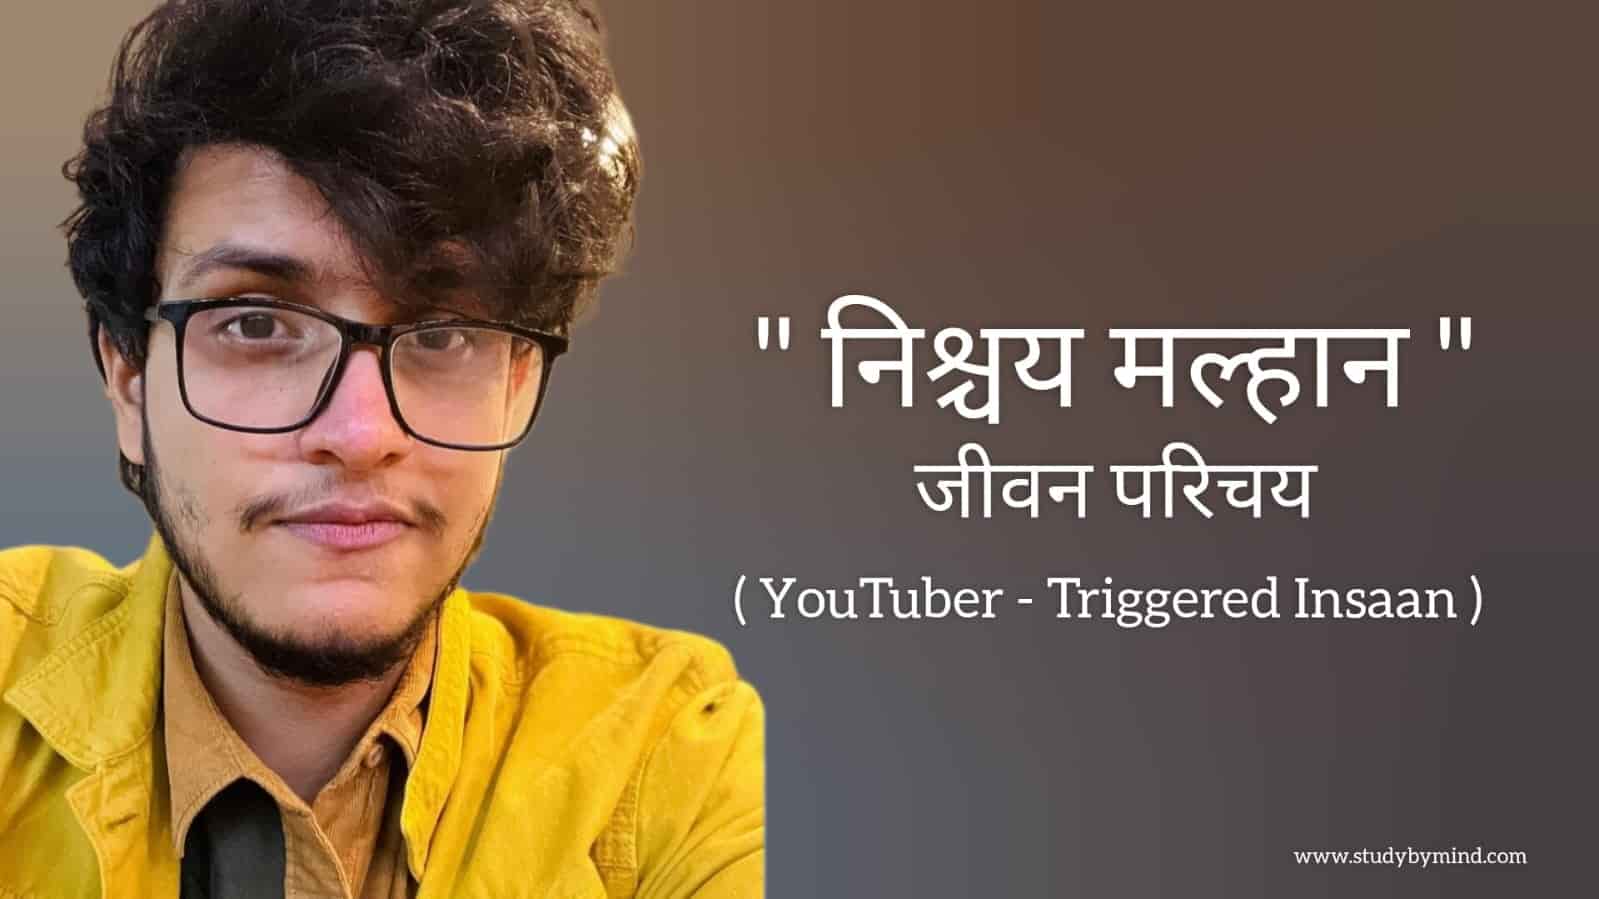 You are currently viewing निश्चय मल्हान जीवन परिचय Nischay malhan biography in hindi (Triggered insaan youtuber)